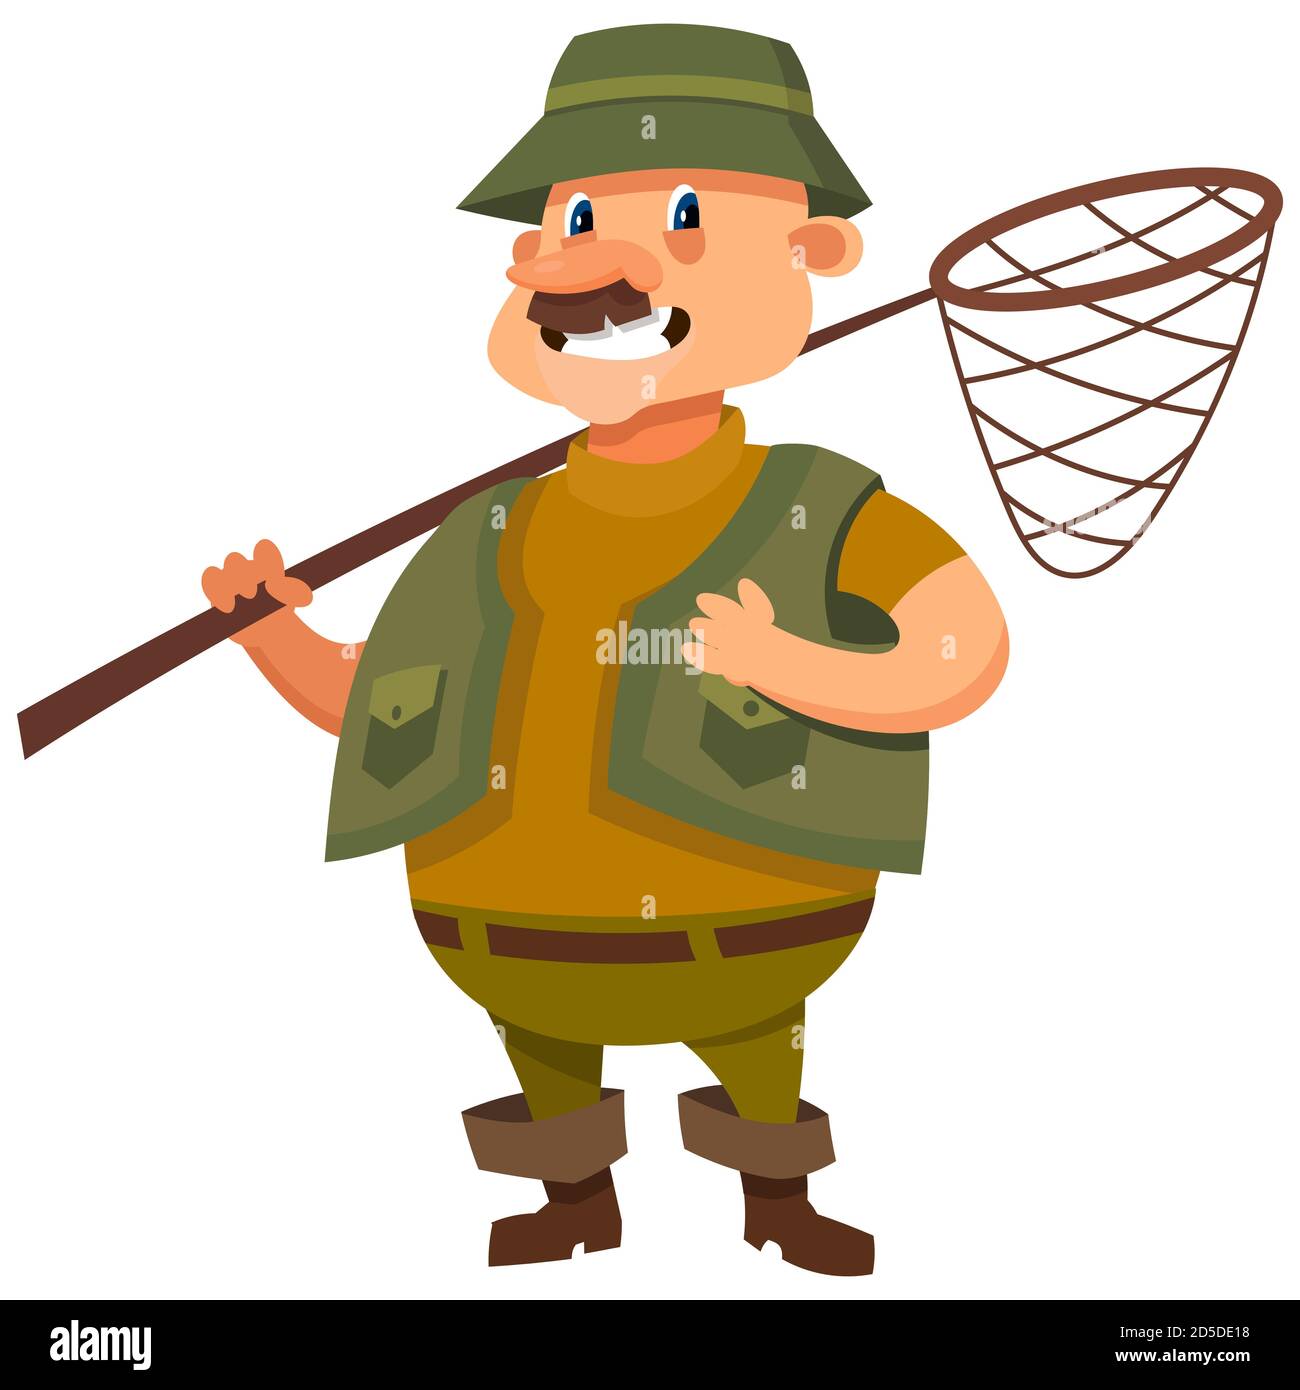 Fisherman cartoon Cut Out Stock Images & Pictures - Alamy